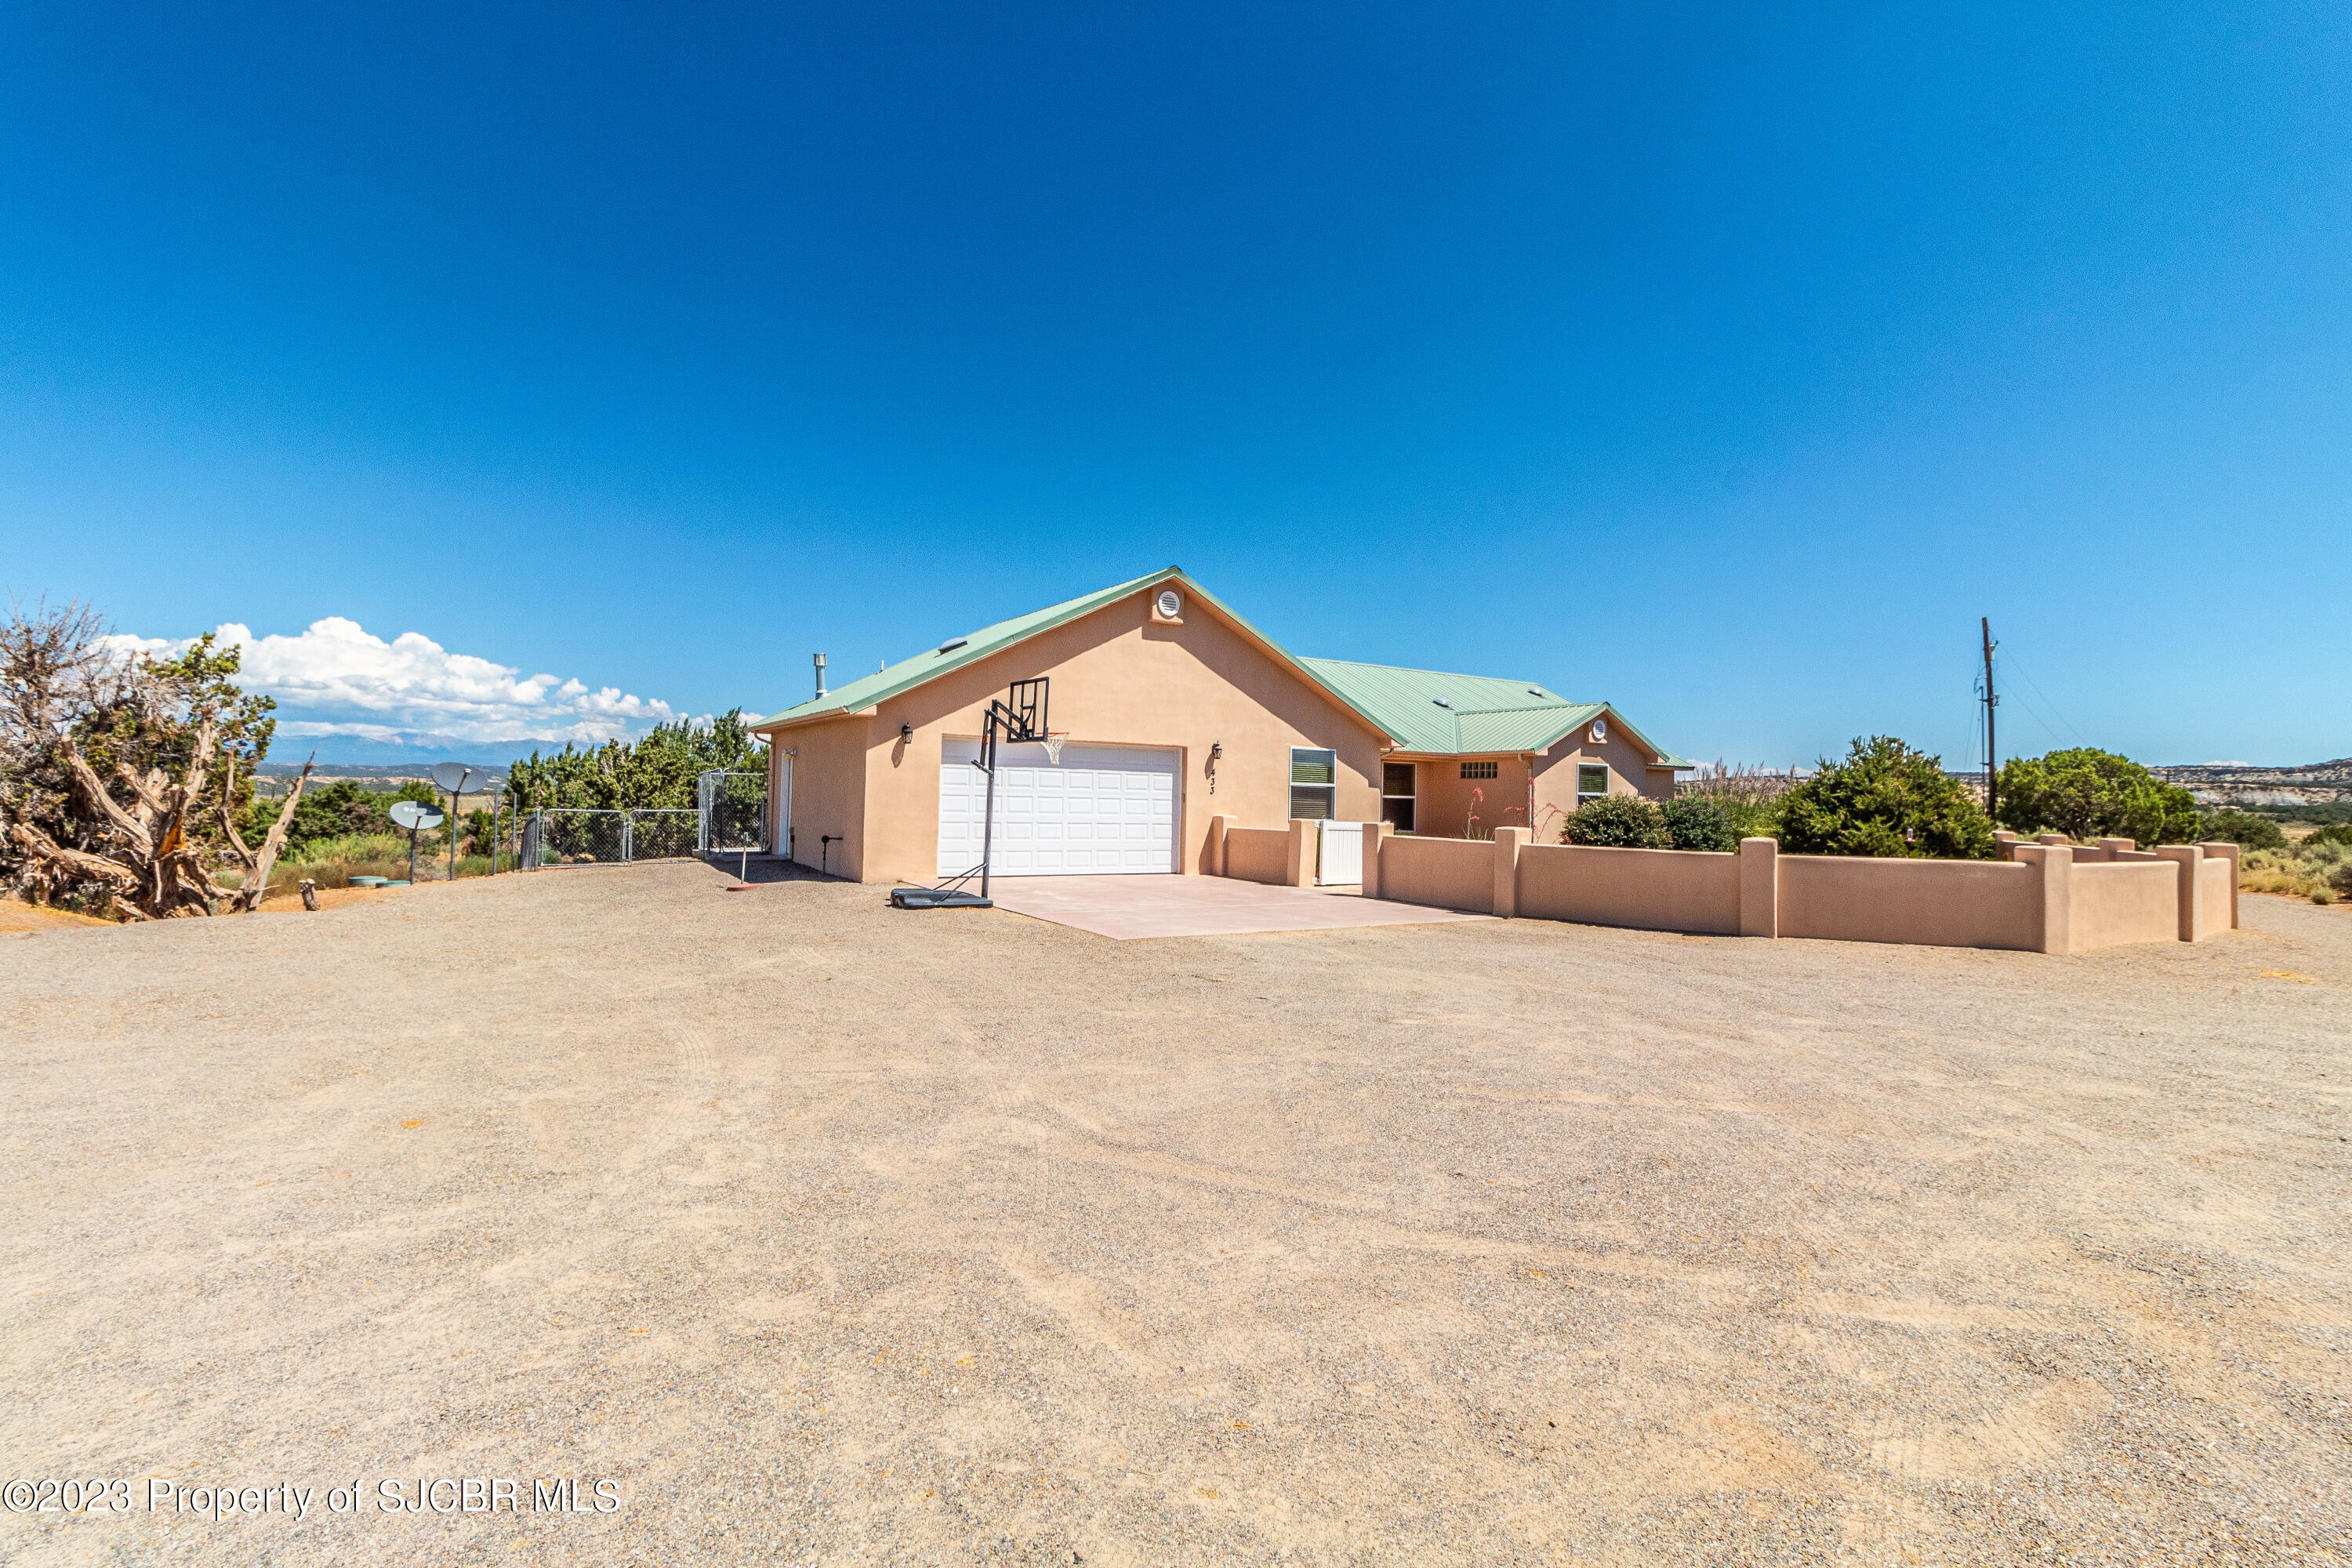 433 ROAD 1350, La Plata, New Mexico, 87418, United States, 3 Bedrooms Bedrooms, ,2 BathroomsBathrooms,Residential,For Sale,433 ROAD 1350,1478699